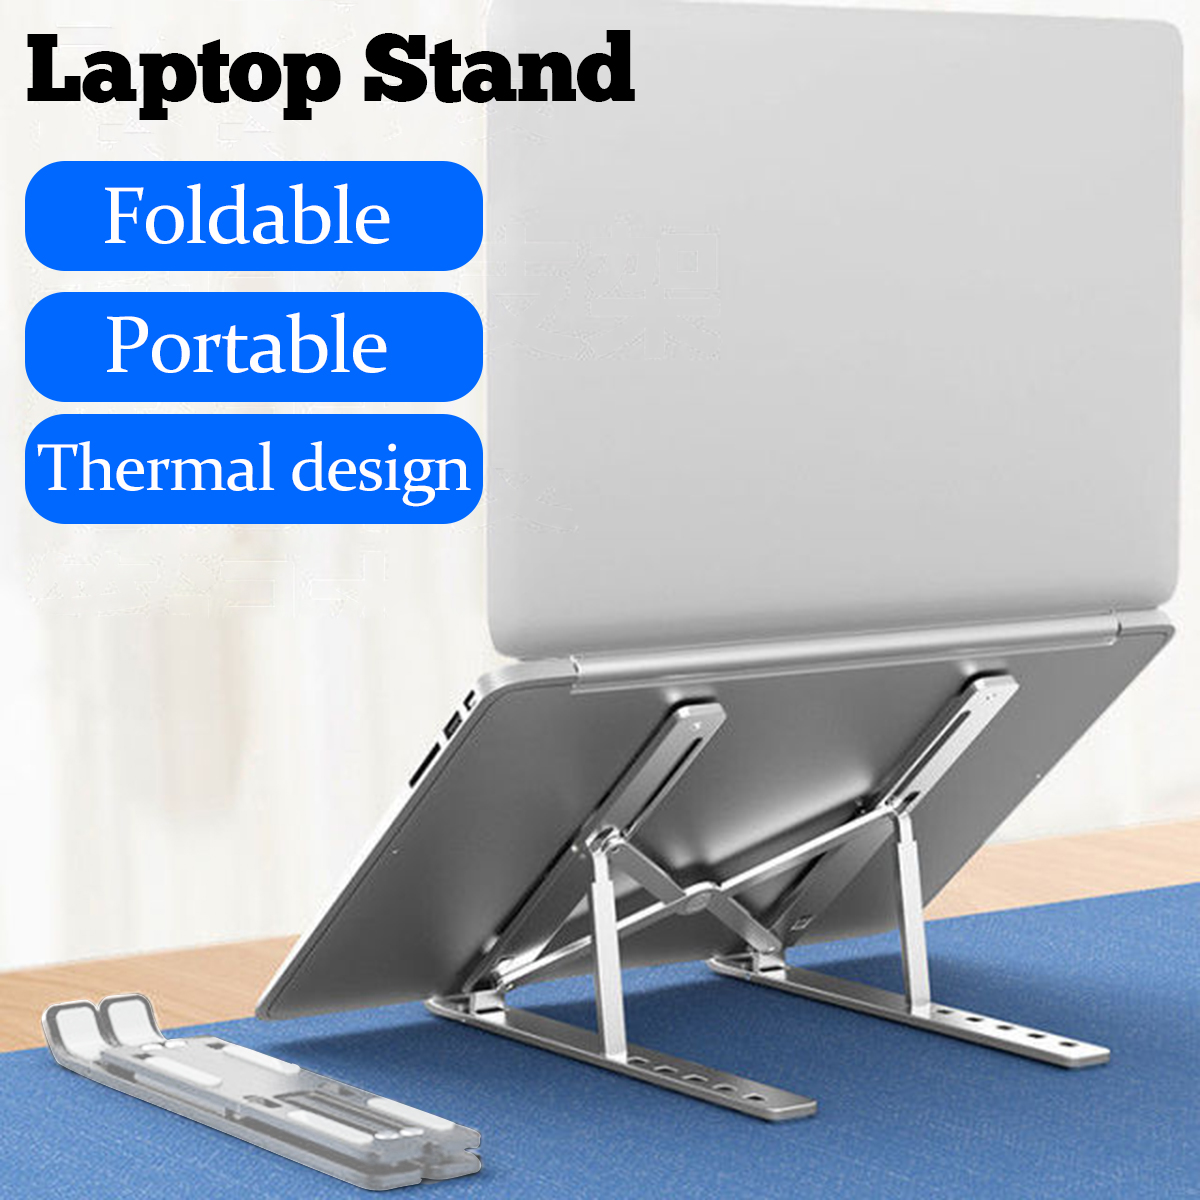 Folding-Laptop-Stand-Computer-Rack-Cooling-Pad-Portable-Support-Base-Desktop-Lifting-Radiator-for-No-1743452-1